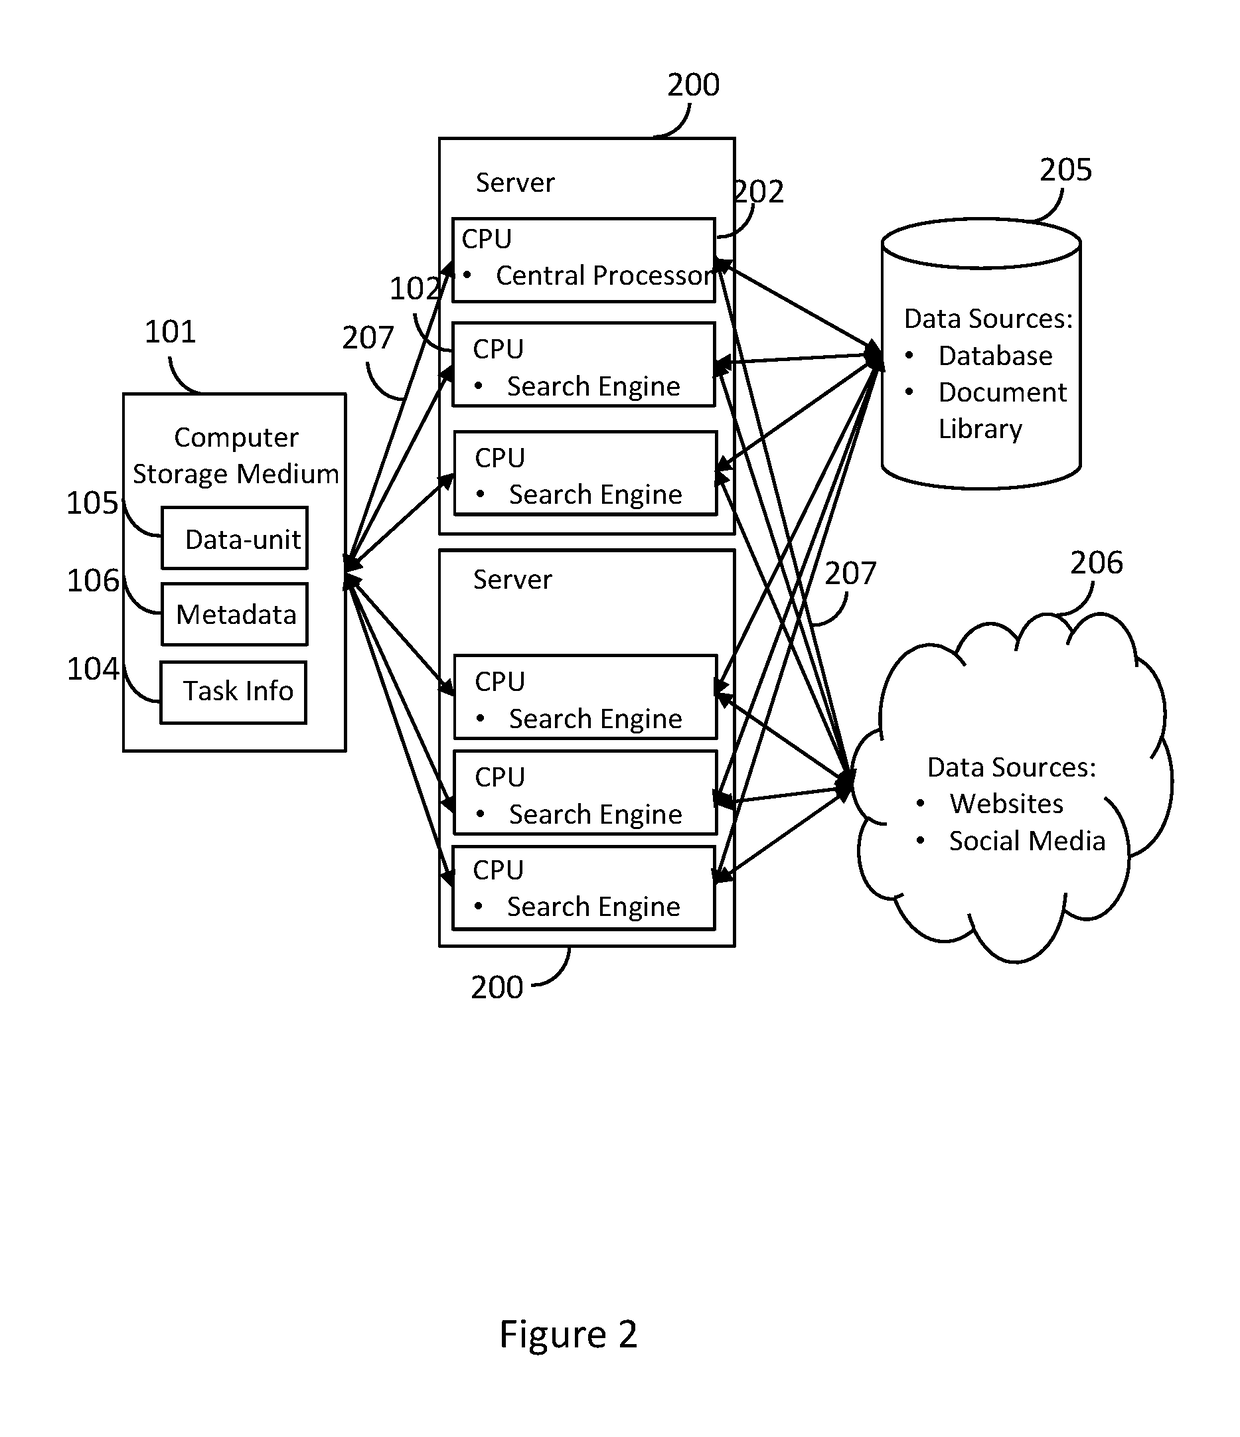 Category-based data analysis system for processing stored data-units and calculating their relevance to a subject domain with exemplary precision, and a computer-implemented method for identifying from a broad range of data sources, social entities that perform the function of Social Influencers